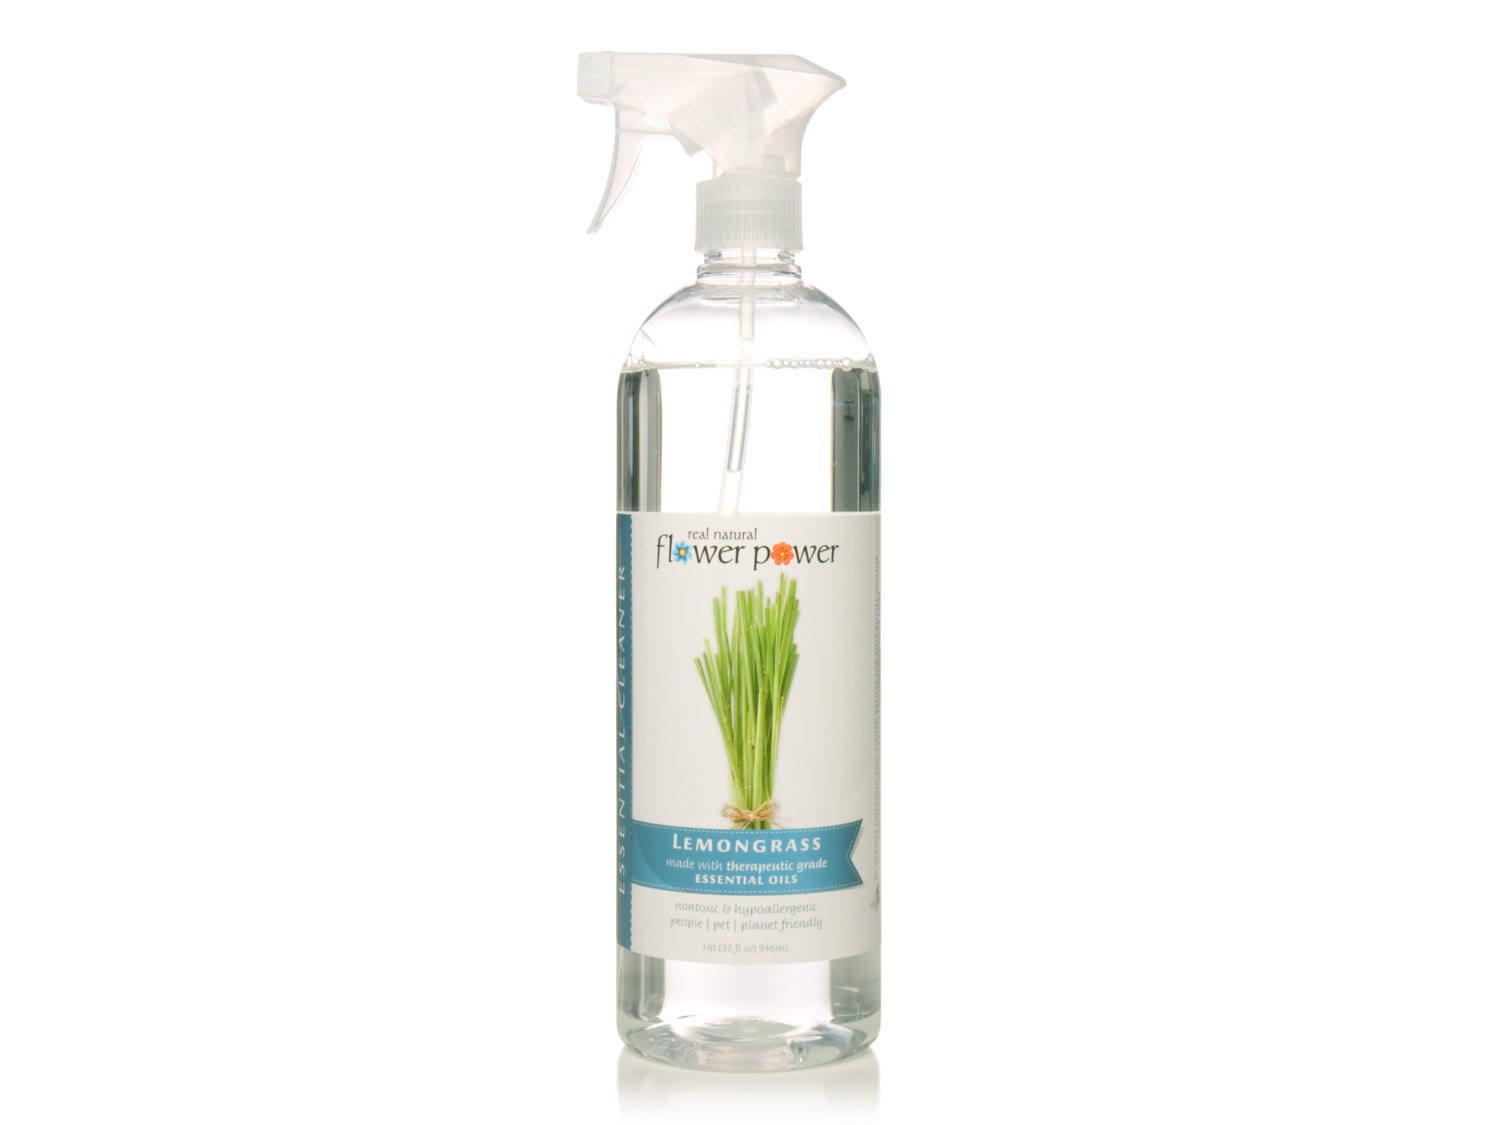 Natural Cleaning Products - Lemongrass All Purpose Natural Cleaner made with Essential Oils, 32 Ounces - NaturalGreenCleaning